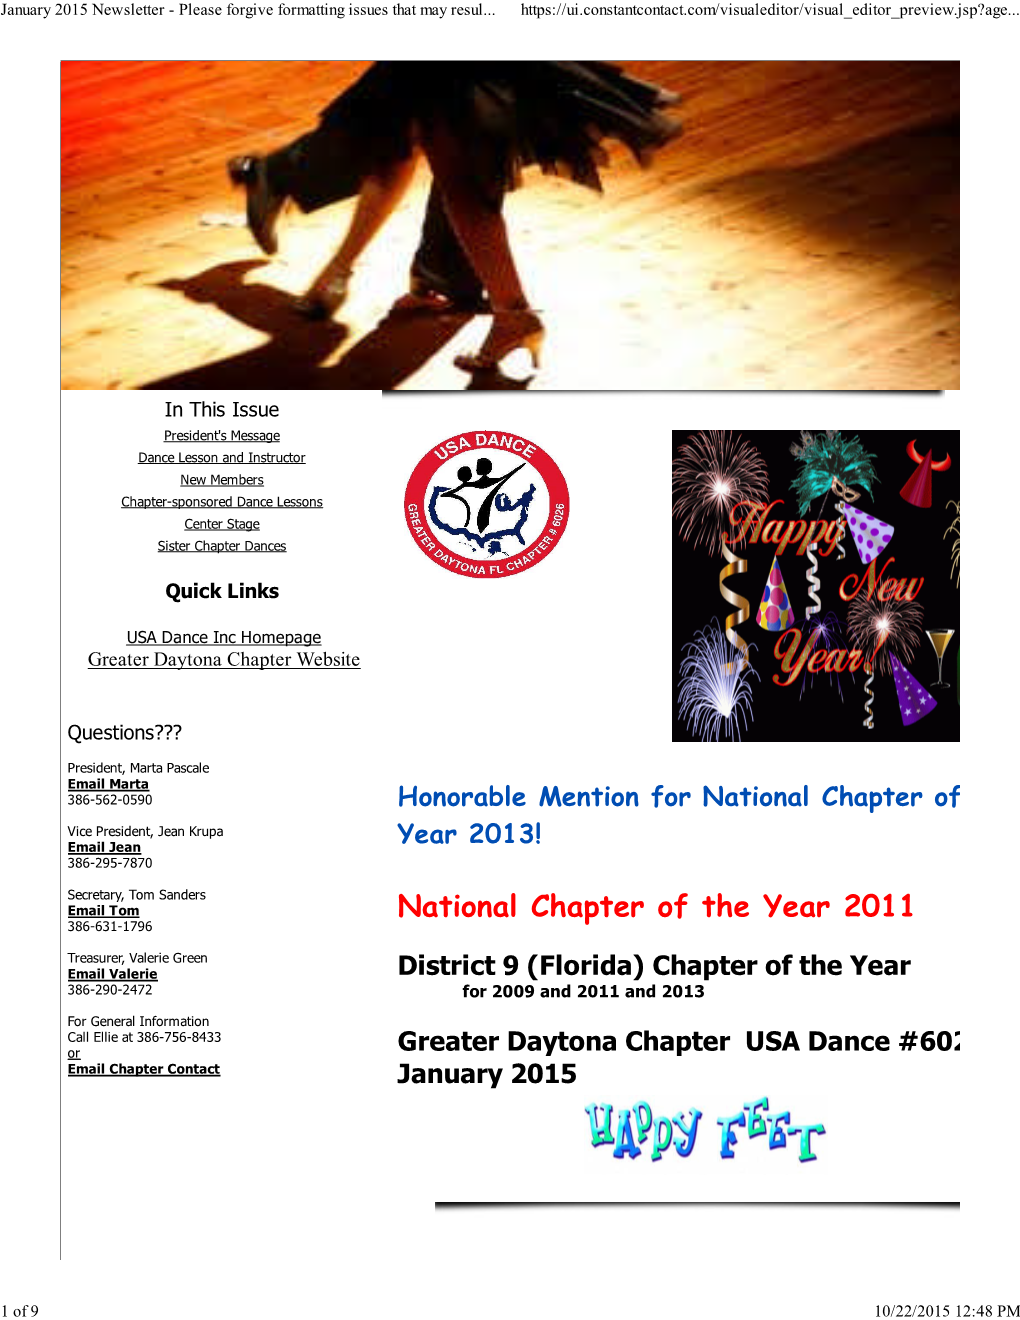 January 2015 Newsletter - Please Forgive Formatting Issues That May Resul